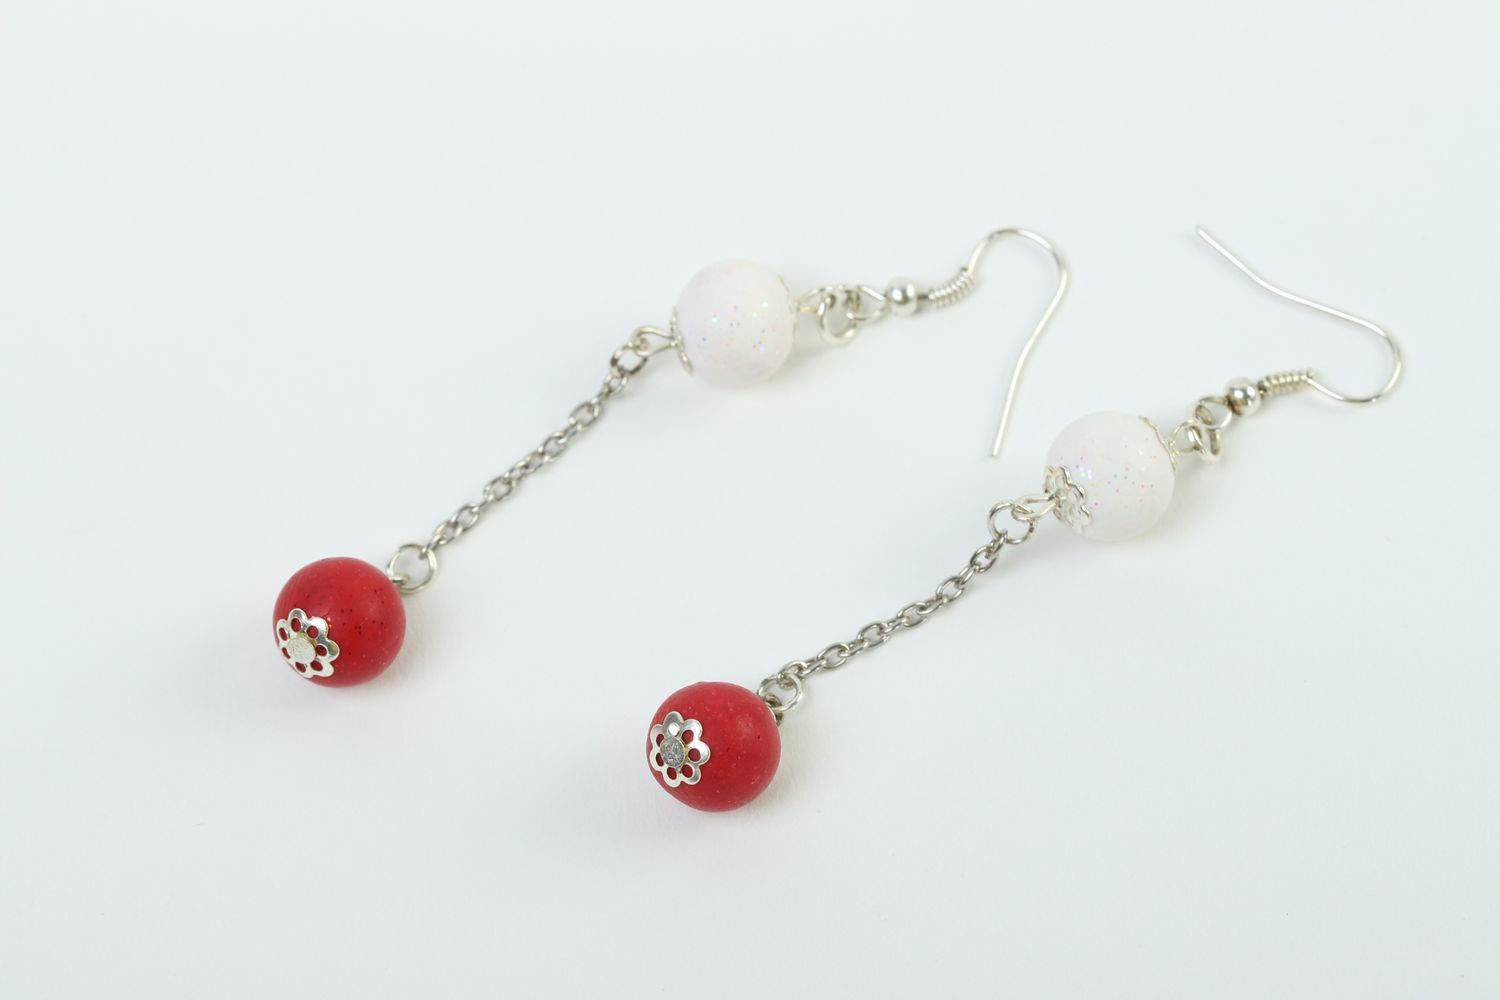 Handmade earrings for kids childrens accessories stylish earrings with charms photo 2